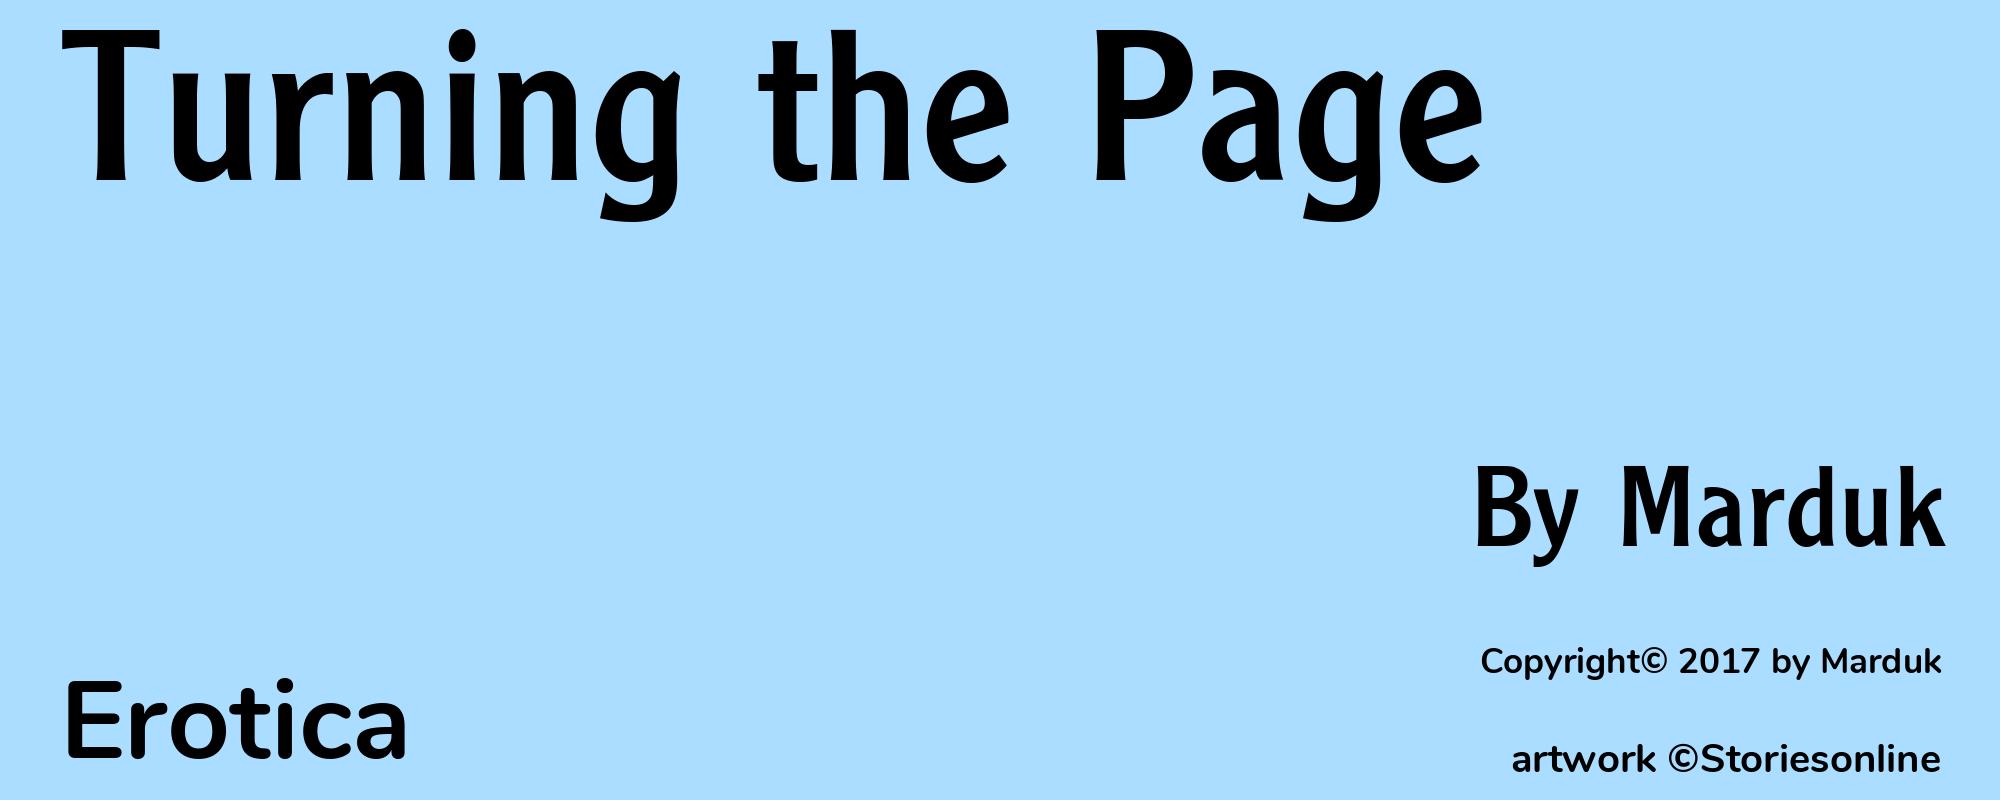 Turning the Page - Cover